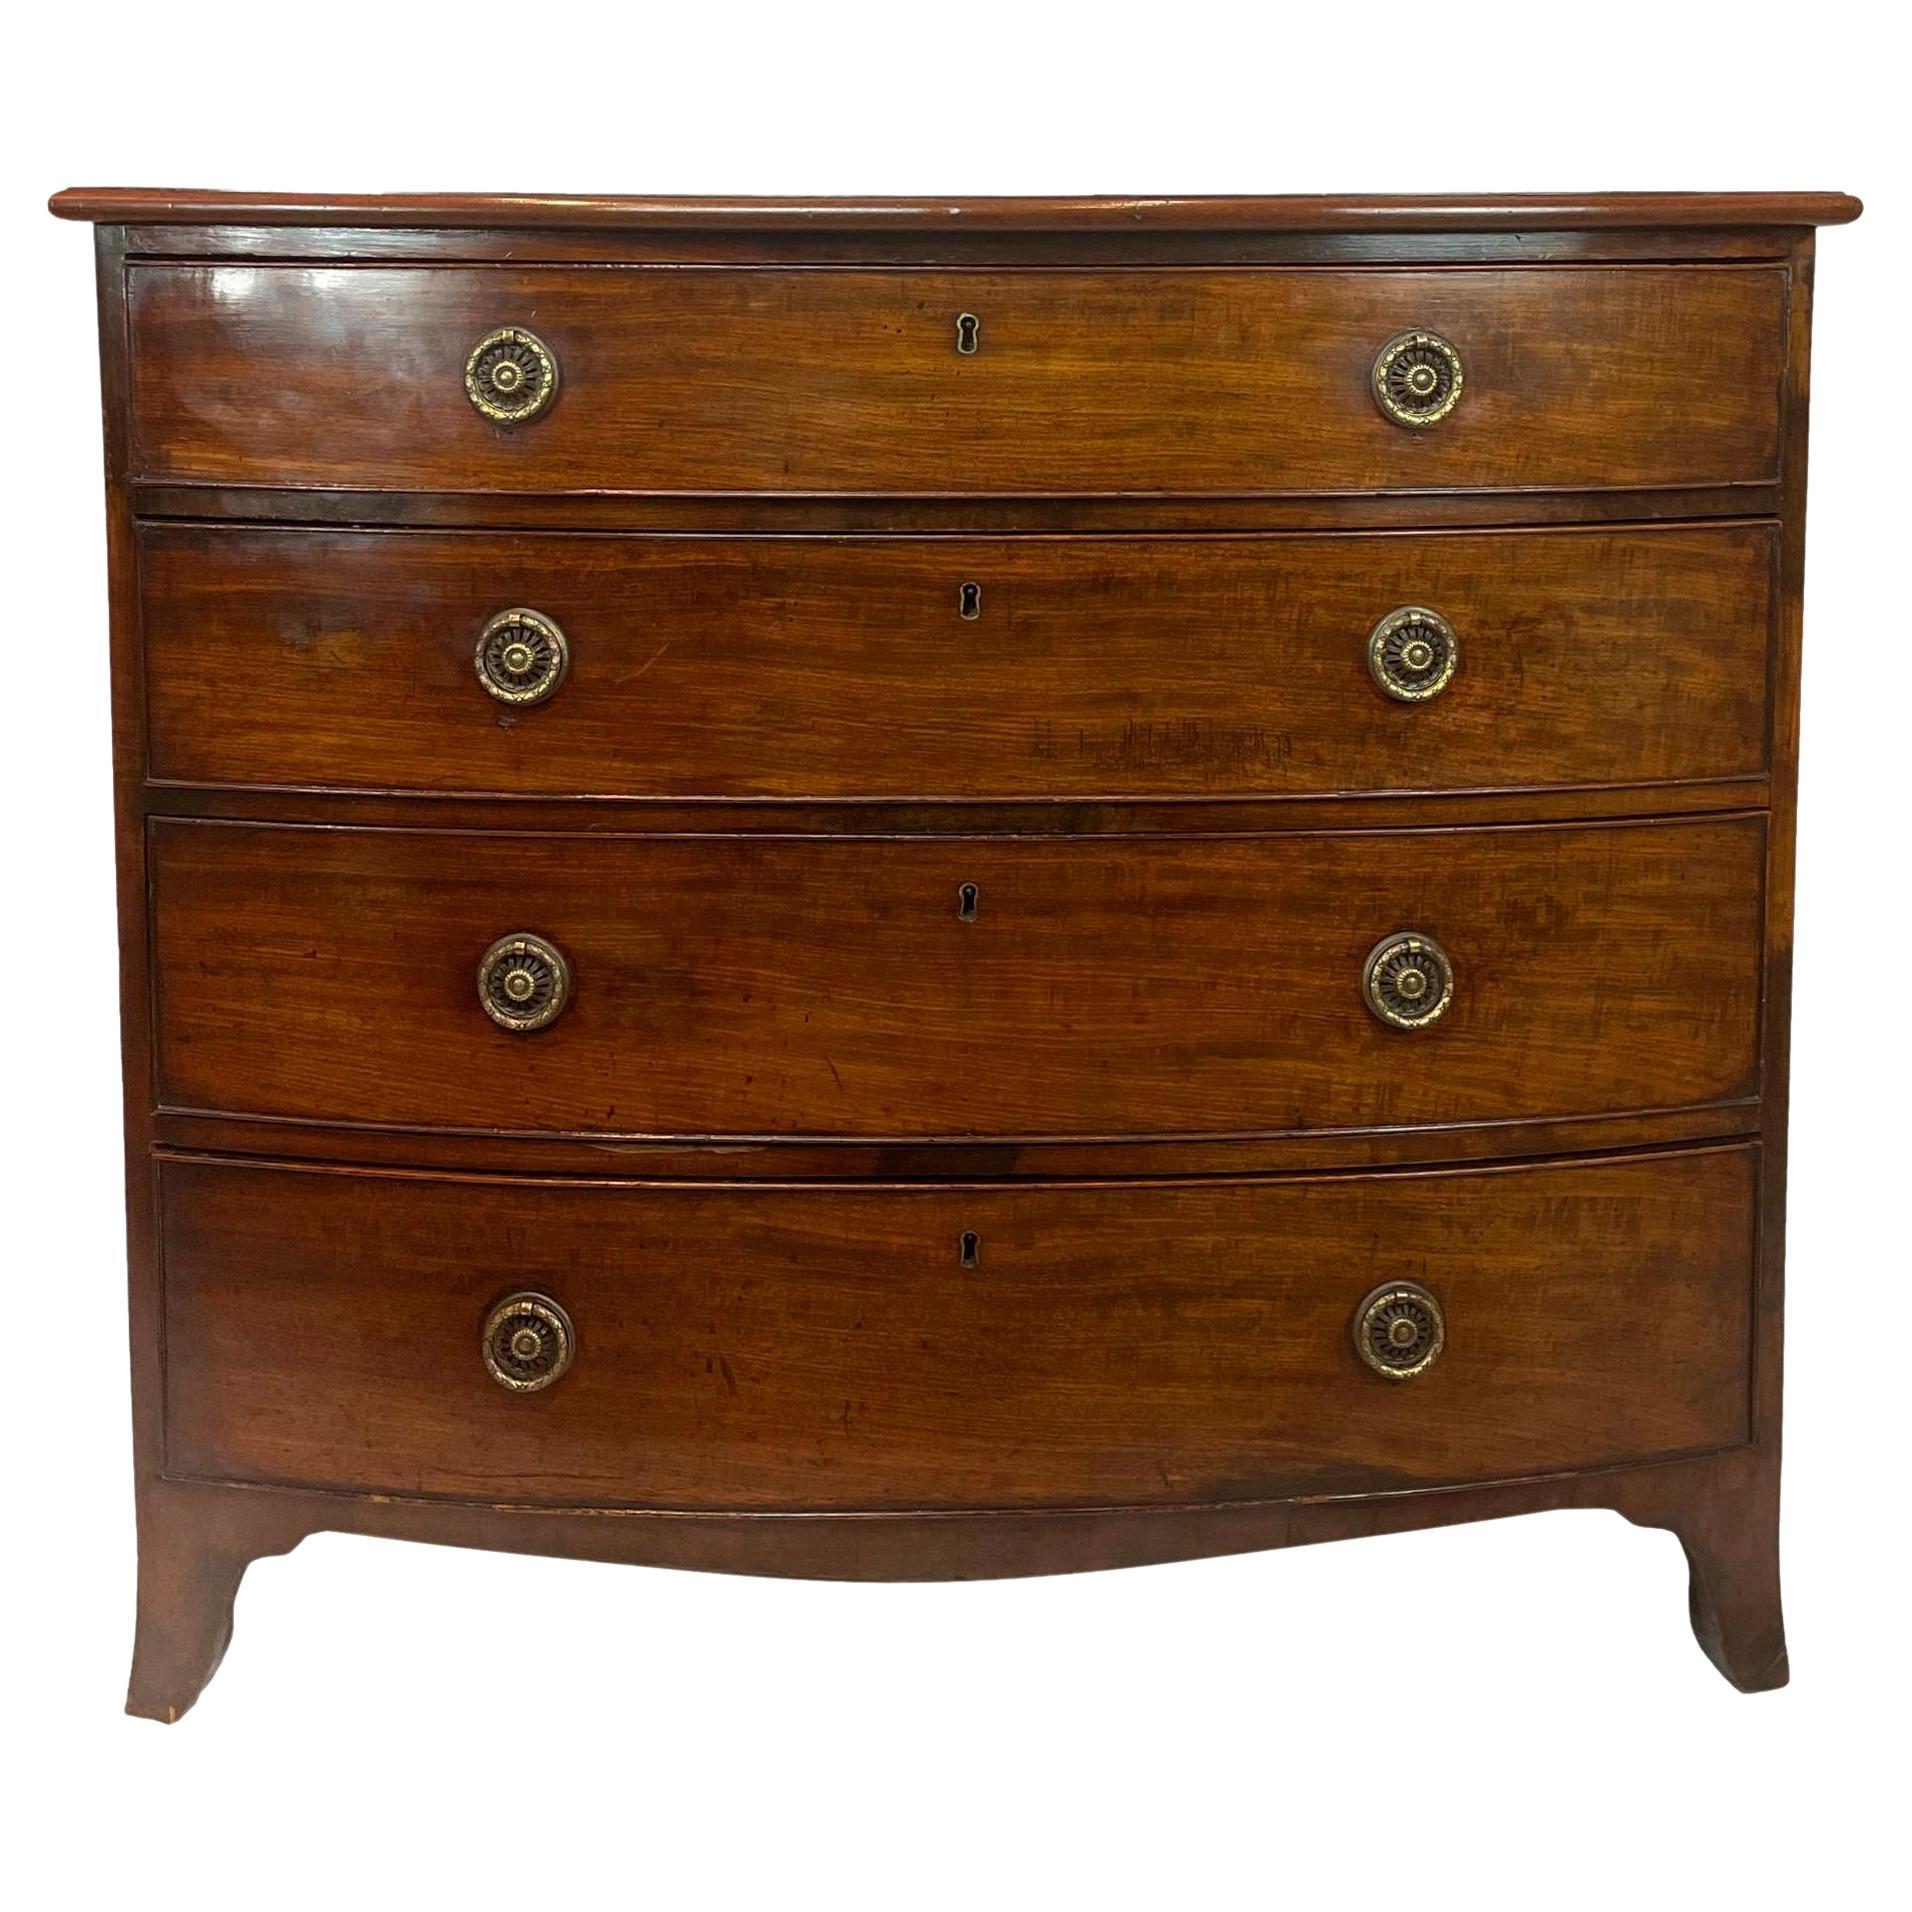 George III Mahogany Bowfront Chest-of-Drawers with Banded Top, English, ca. 1820